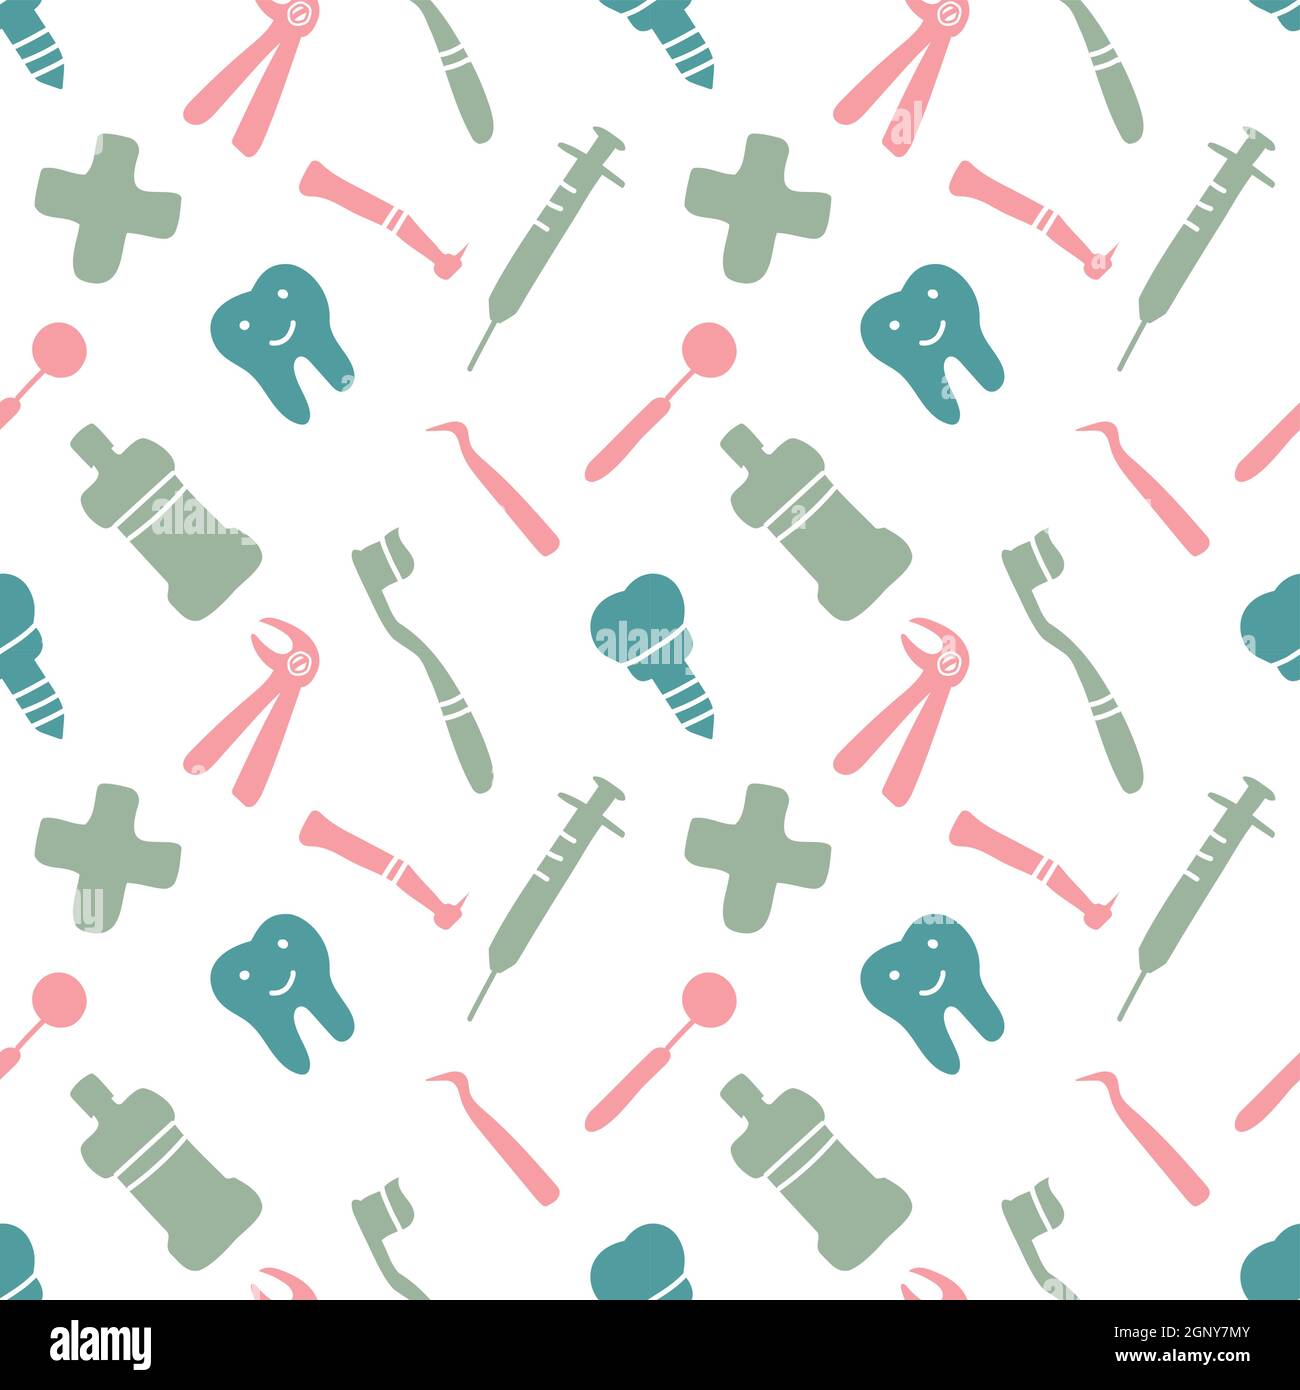 Dental care, Orthodontics Seamless Pattern with Line Icons. Dentist, Medical Equipment, Braces, Tooth Prosthesis, Floss, Caries Treatment, Toothpaste. Stock Vector